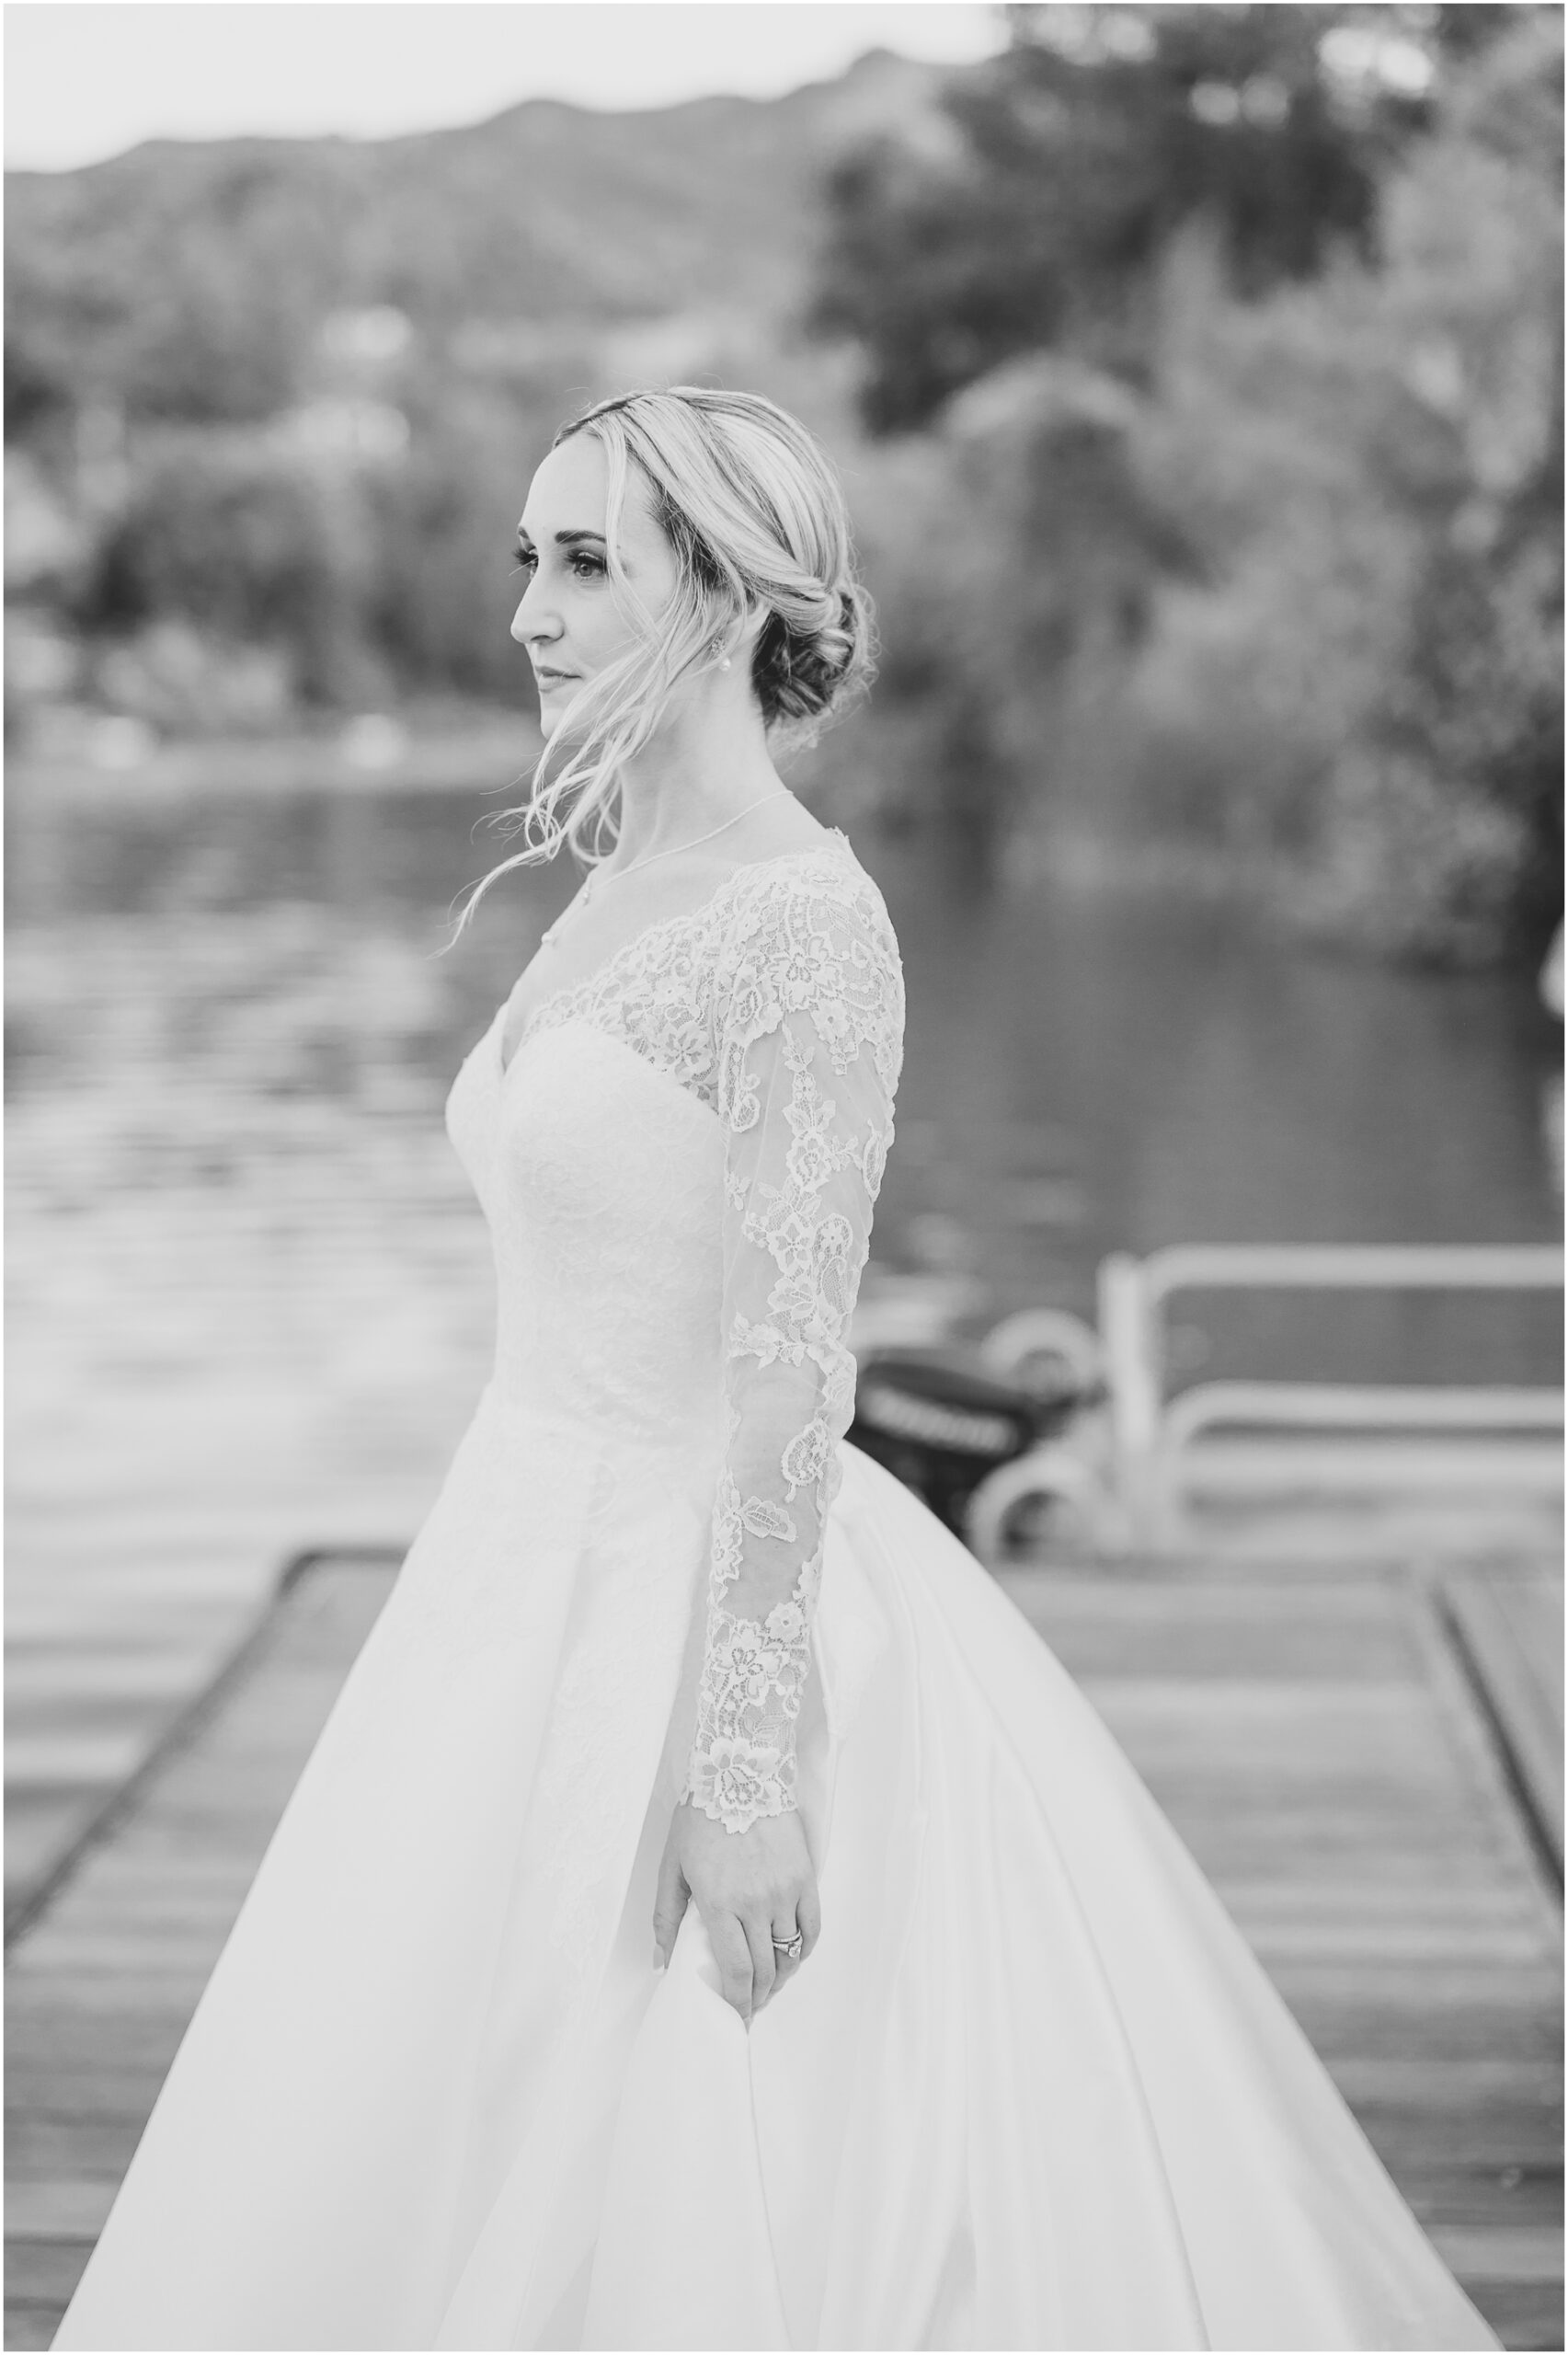 A bride takes a moment of introspection in the middle of her wedding day as she stands on a dock at Malibou Lake